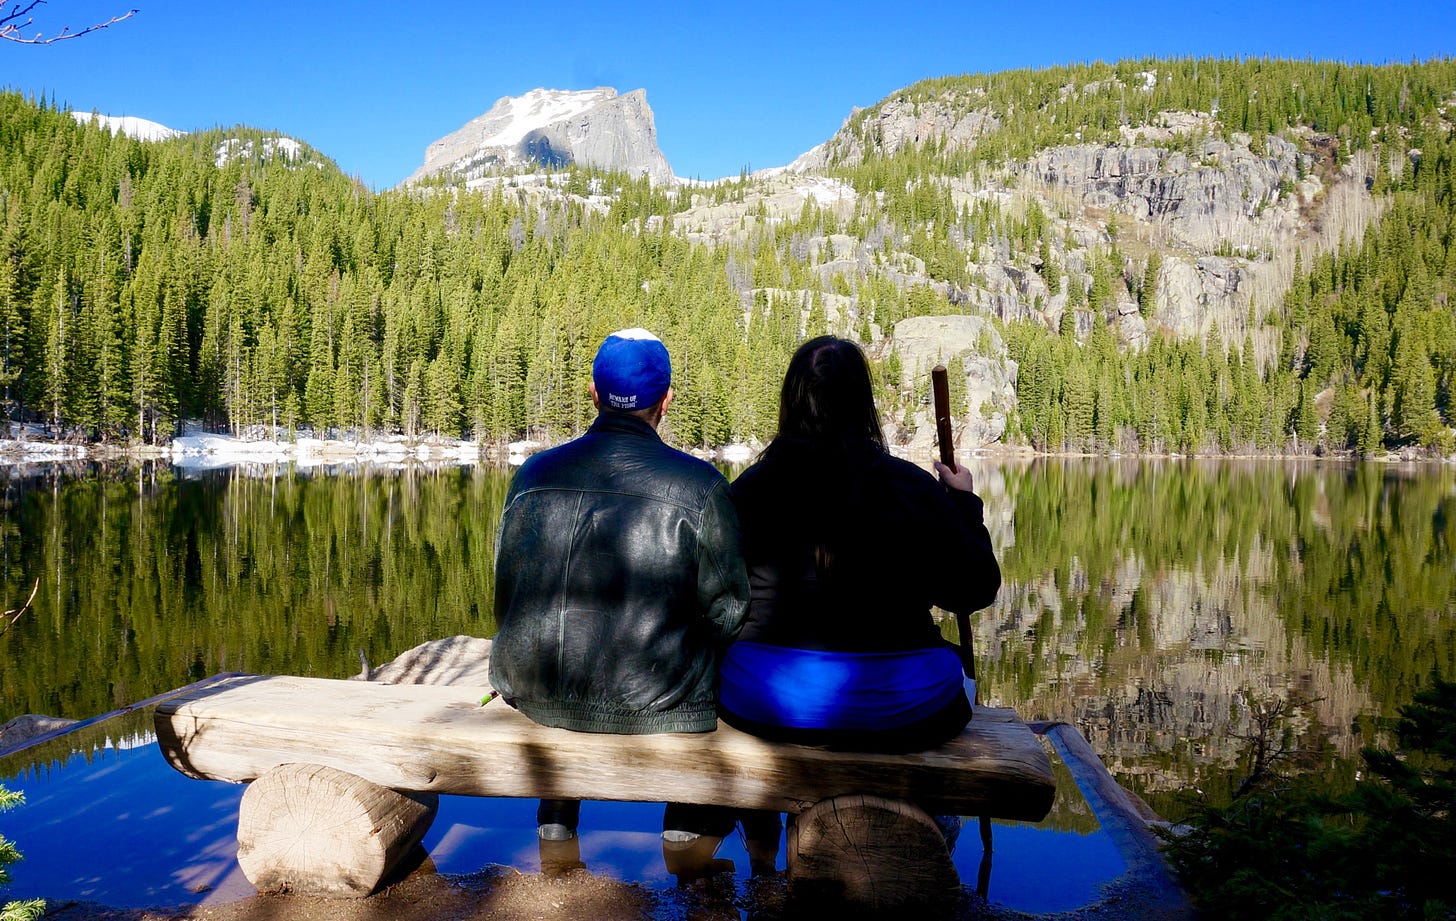 A serene lake scene in Rocky Mountain National Park. The author and her husband are seated in the foreground on a bench